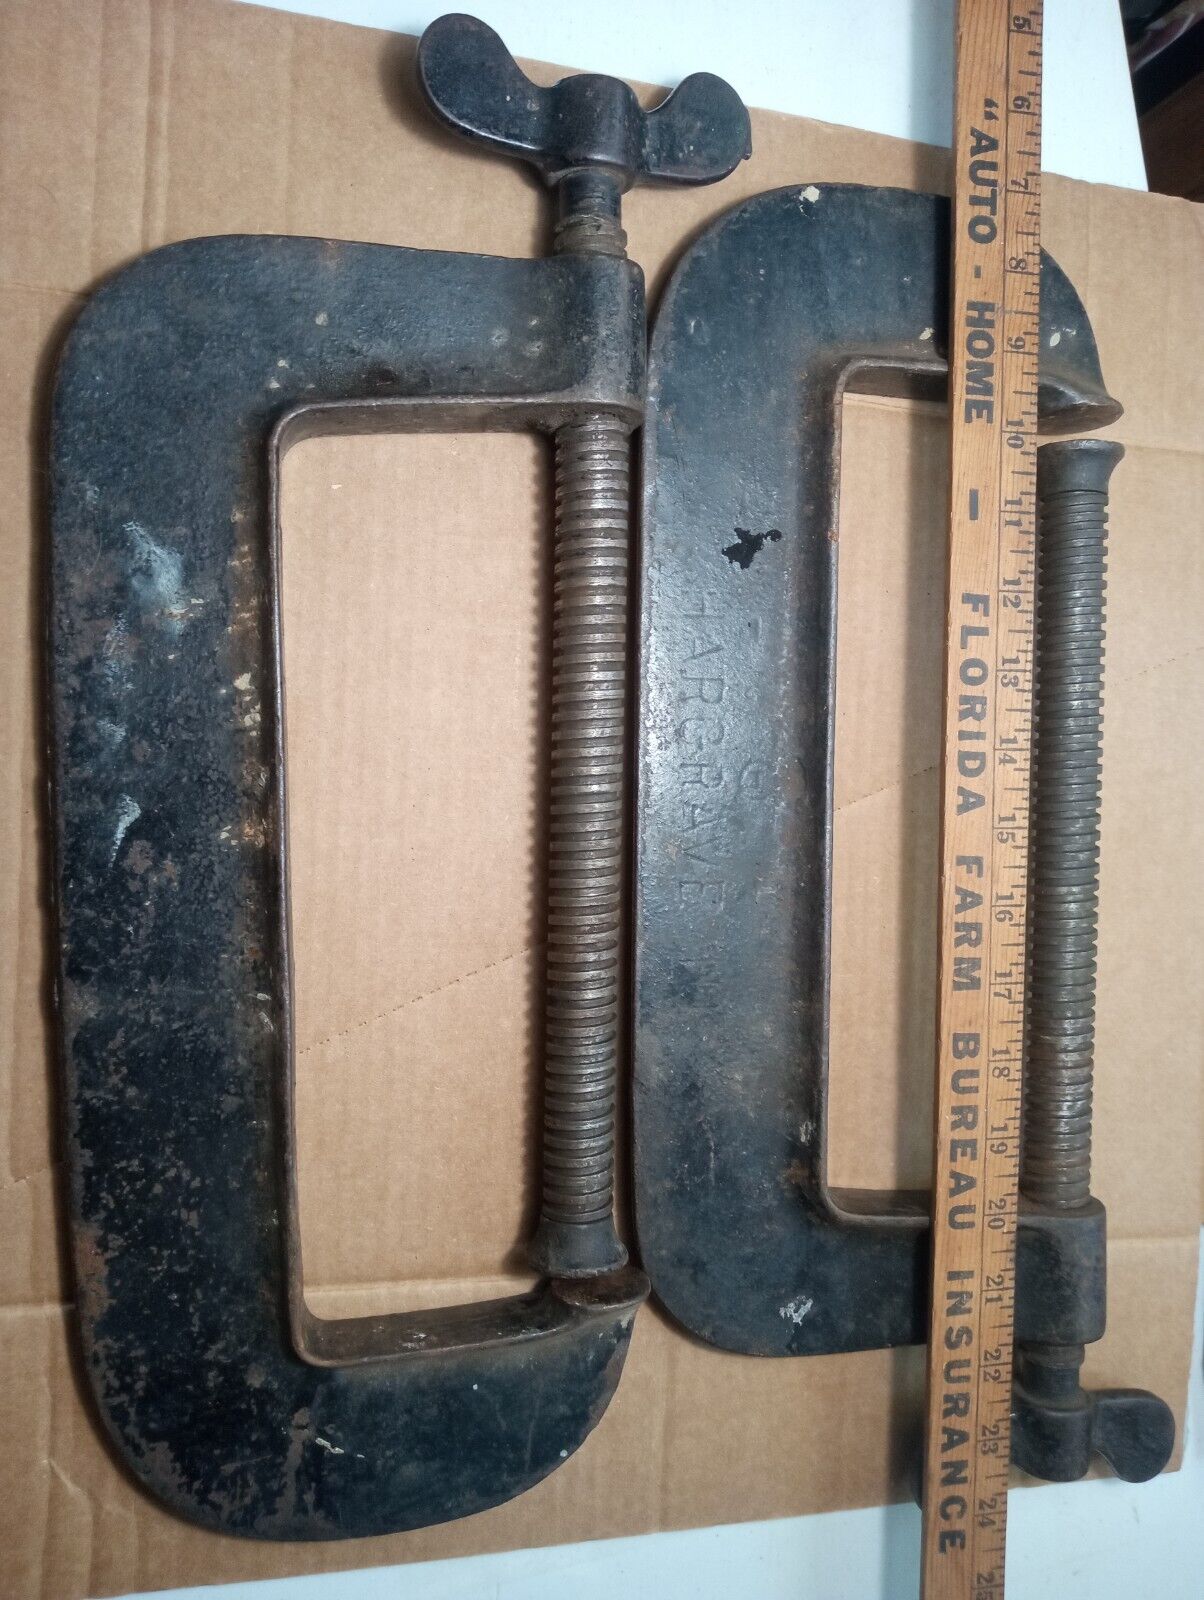 2 VINTAGE HARGRAVE 10 INCH HEAVY DUTY C CLAMPS